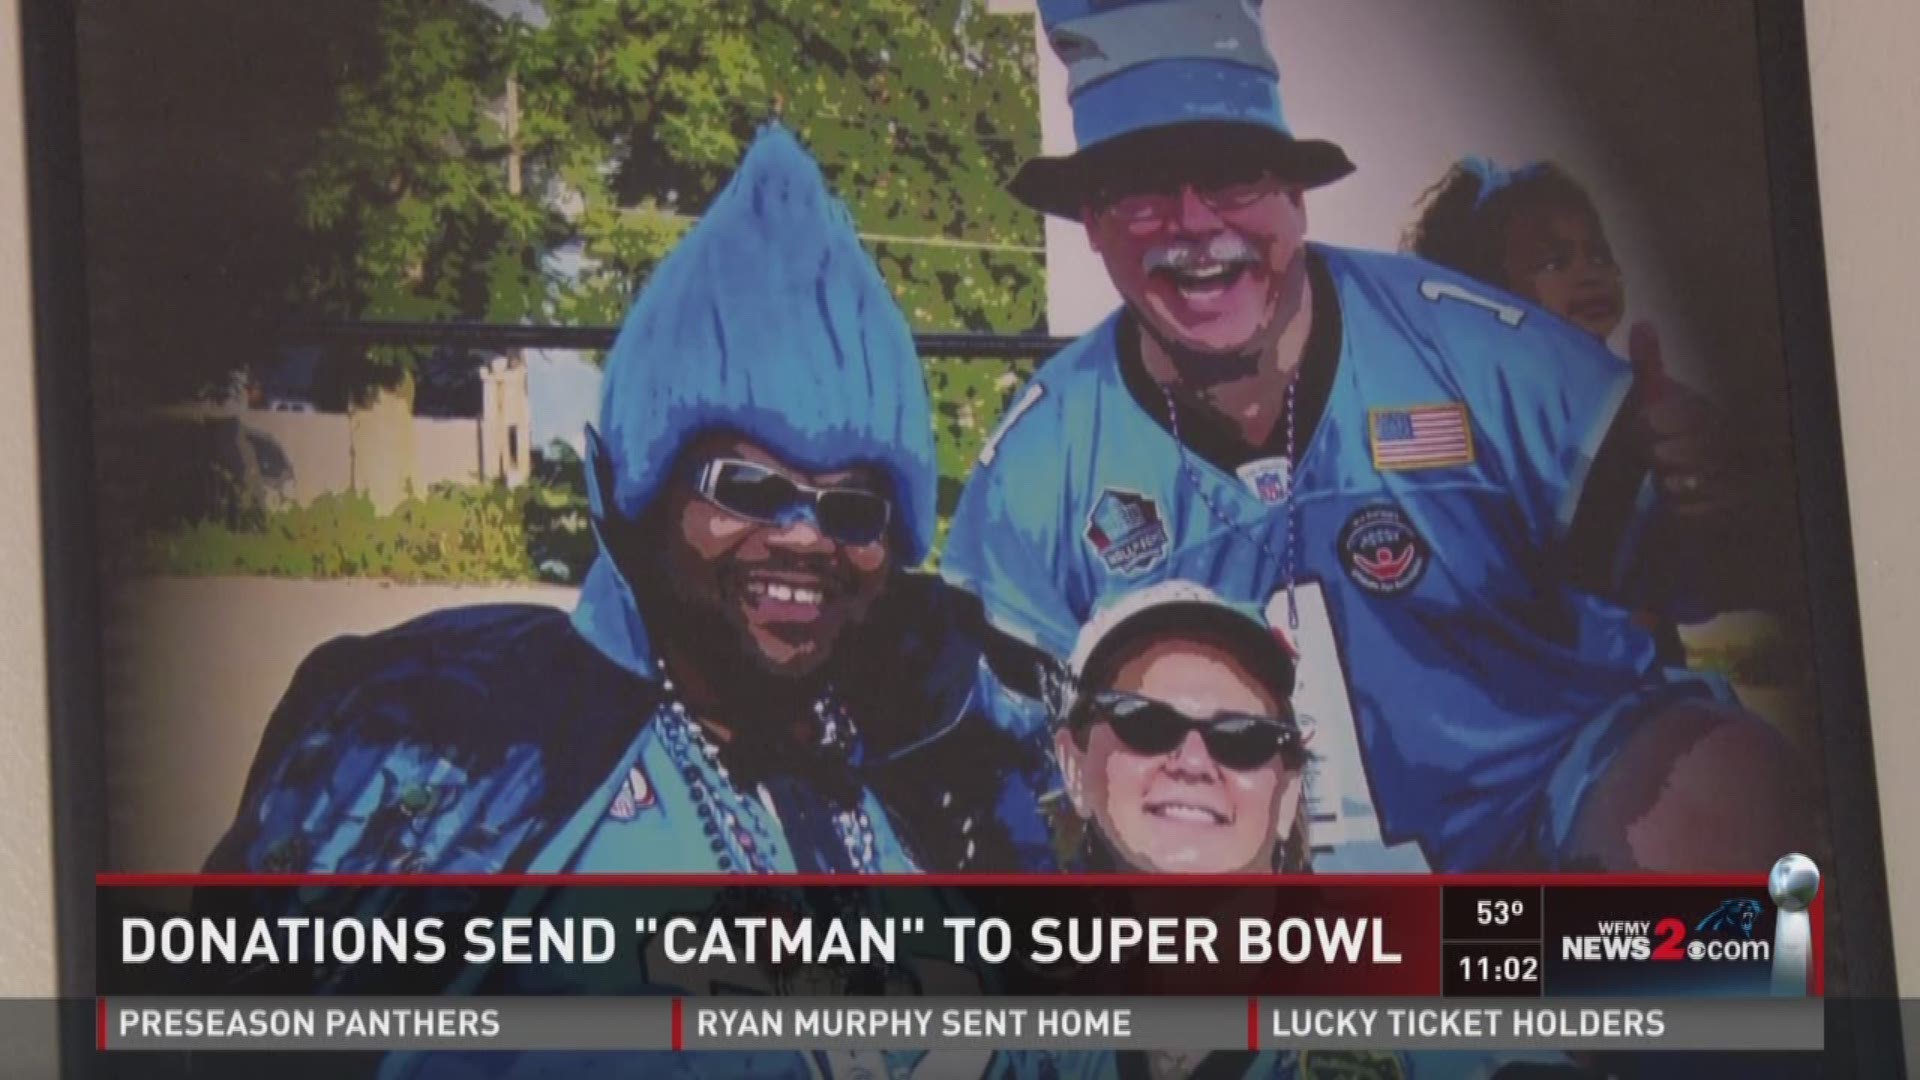 Catman Goes to Super Bowl